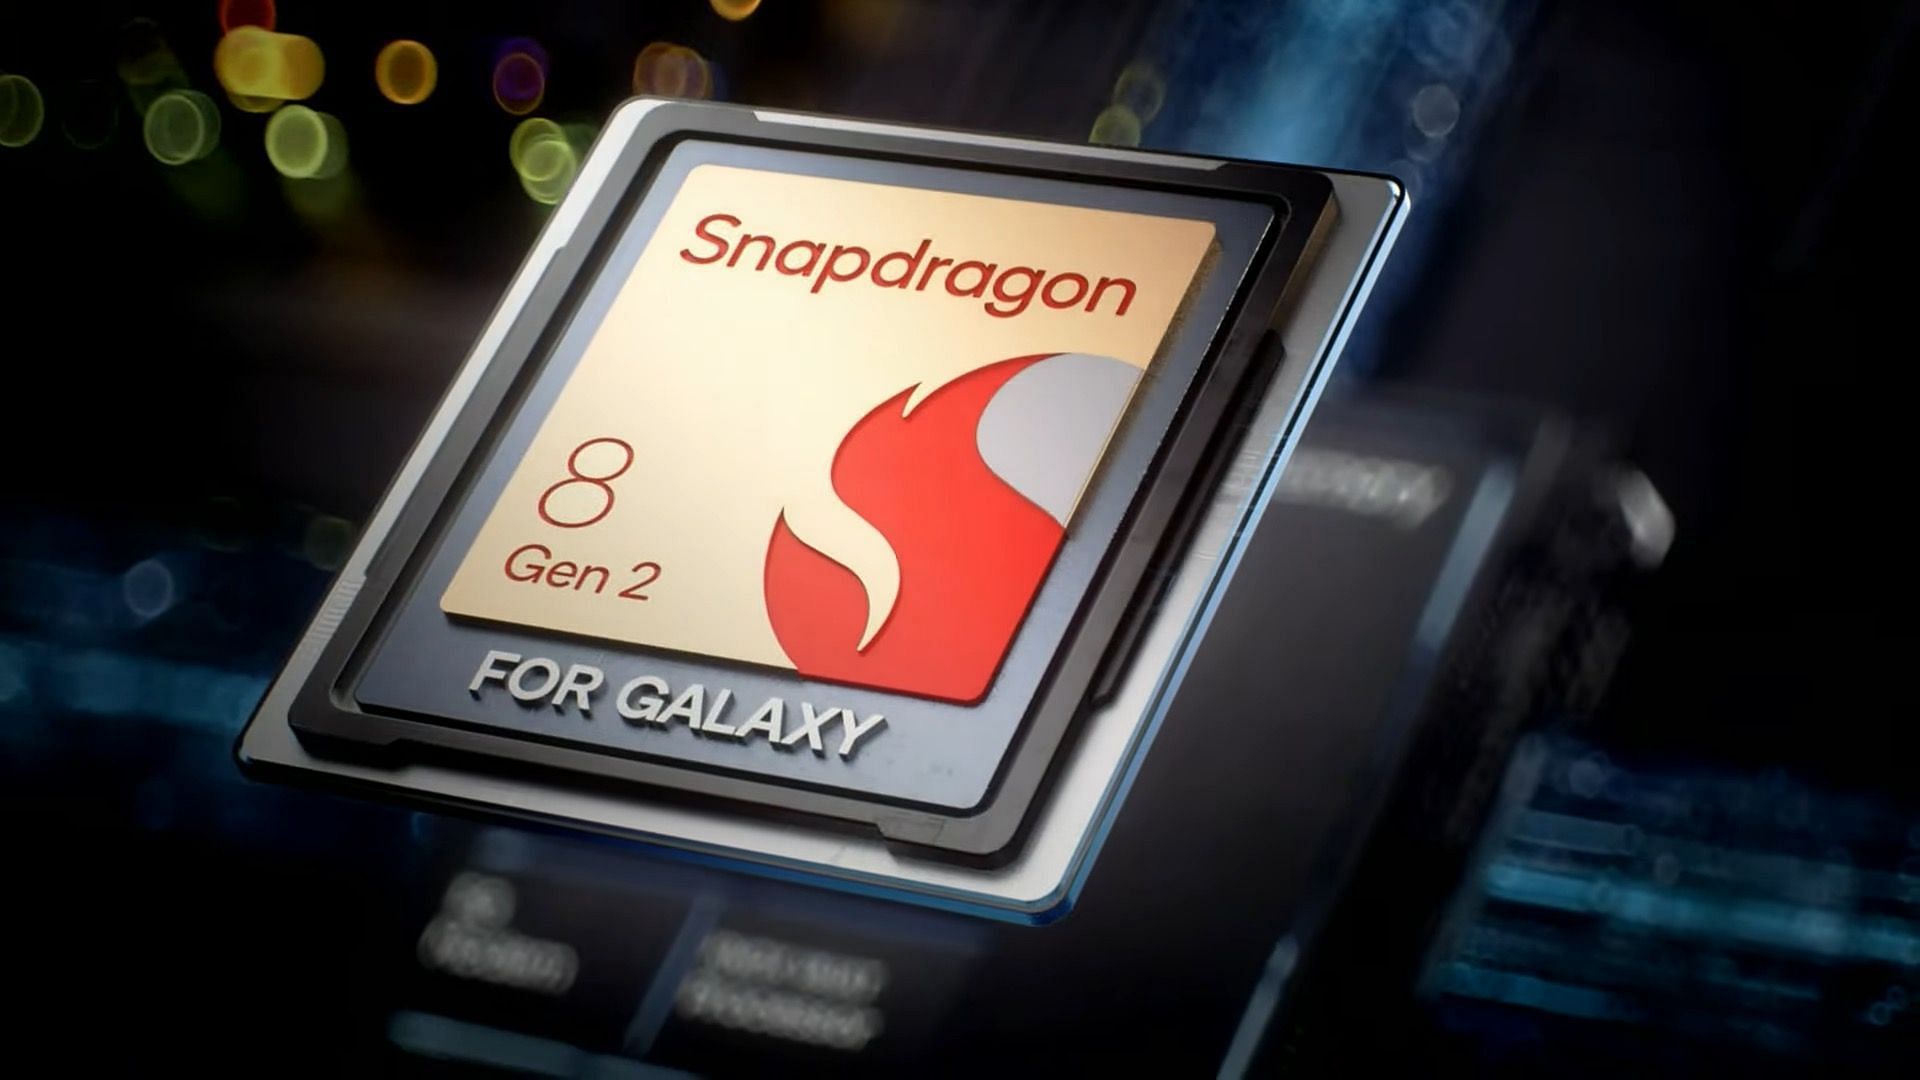 The Snapdragon 8 Gen 2 for Galaxy chip (Image via Qualcomm)